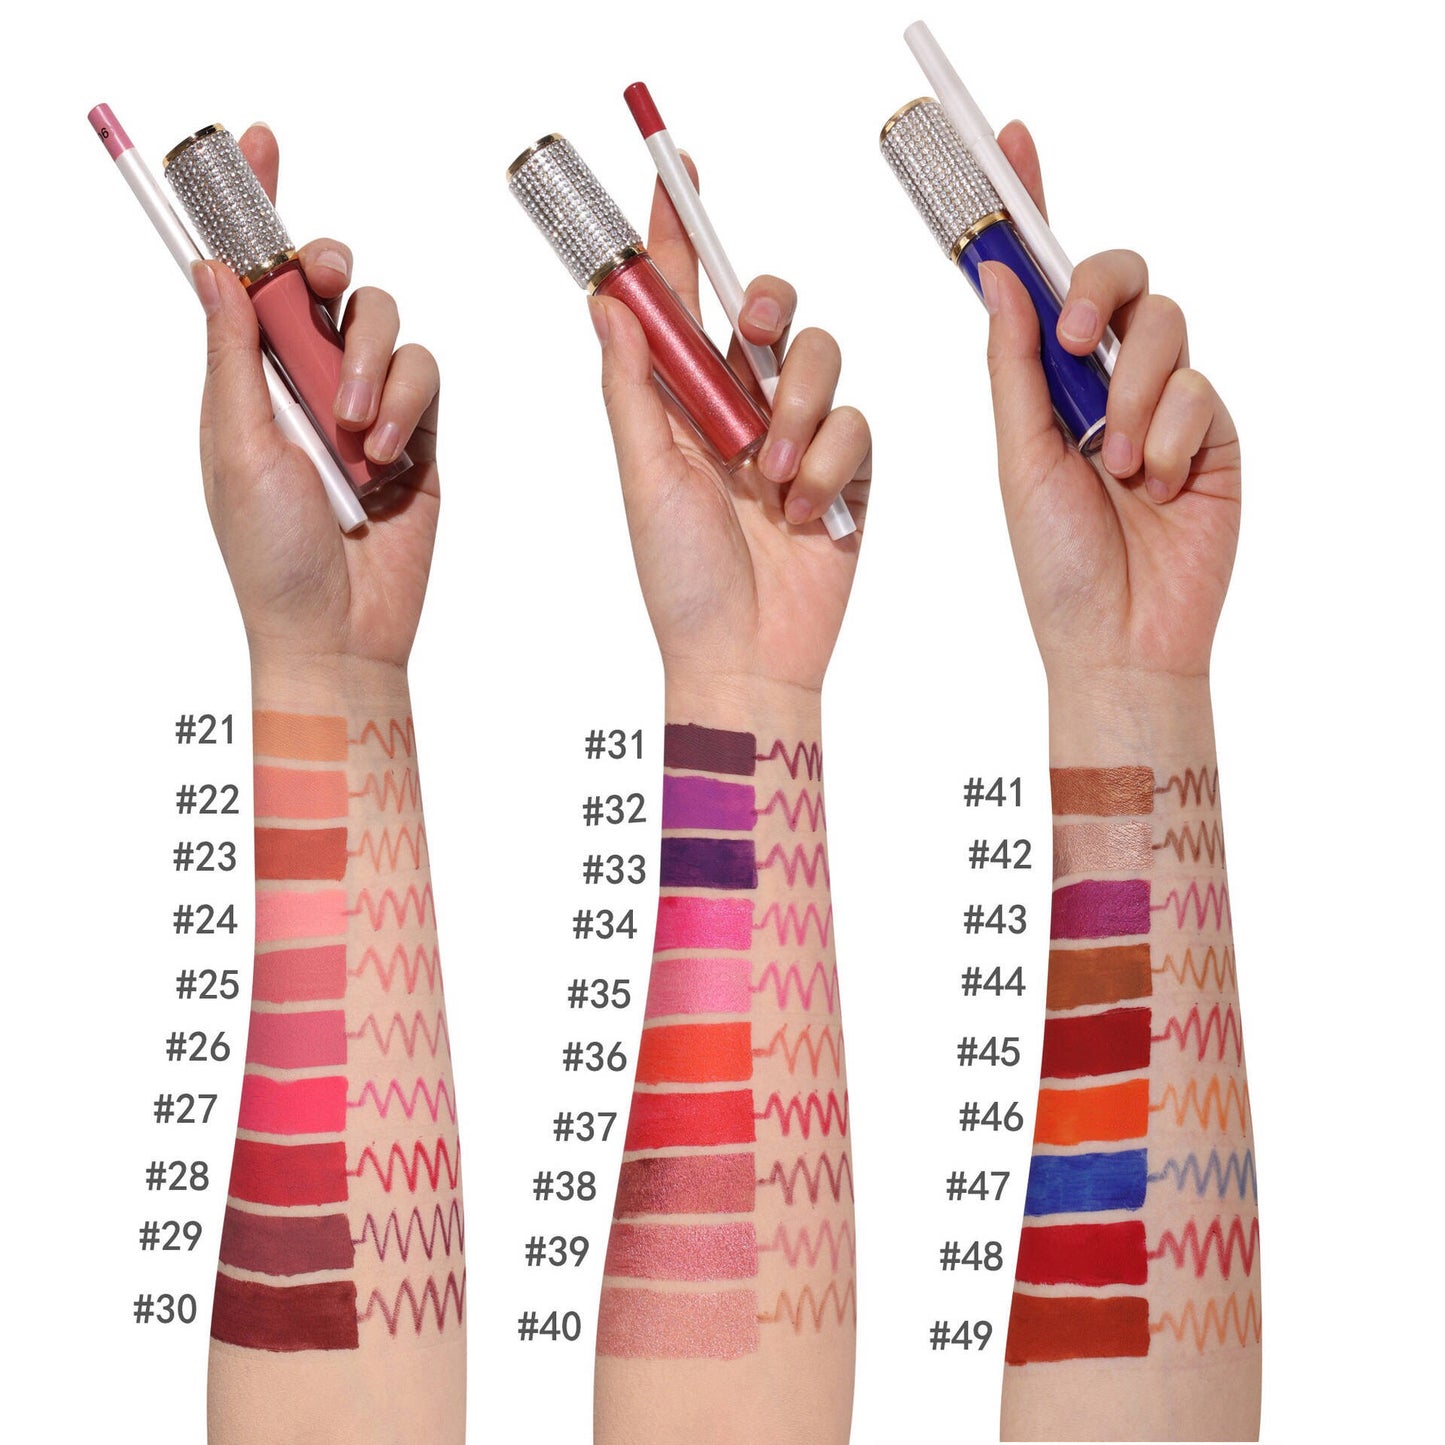 Private Label - 4 Side Matte Lip Kit [Fully Customized]